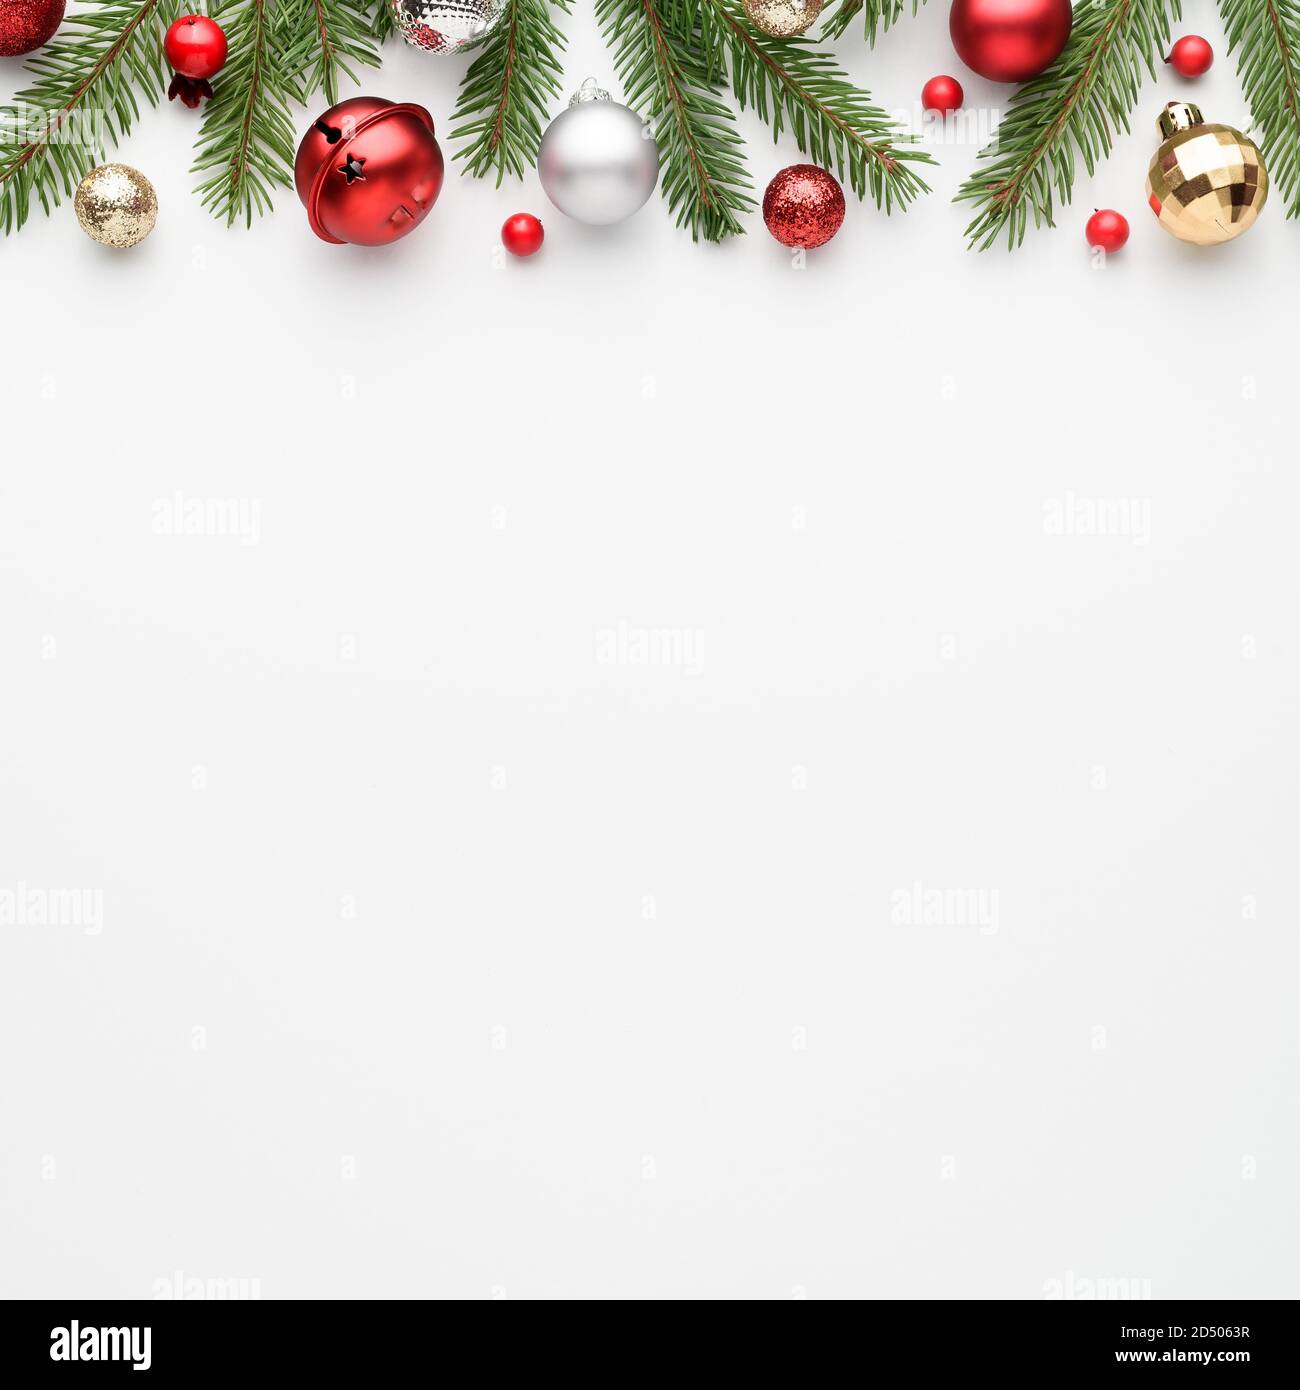 Square christmas card with fir decorations on white background. Festive border with copy space for advertising text. Top view, flat lay Stock Photo